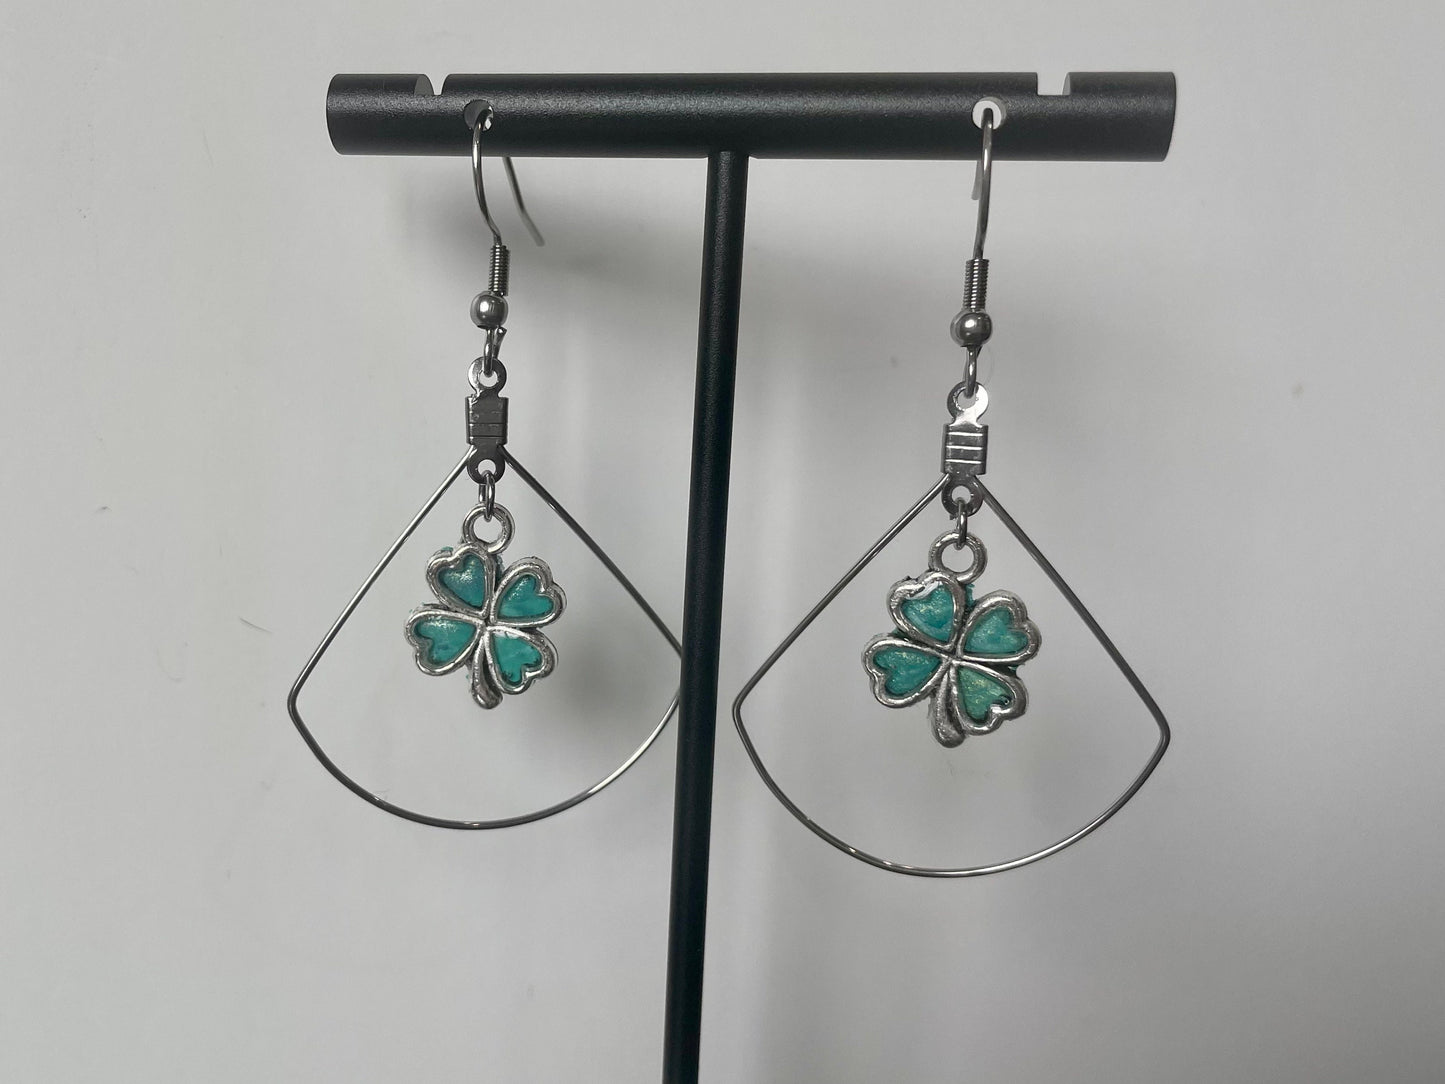 Green Four Leaf Clover Dangle Earrings great for Saint Patrick's Day or Anytime You Can Use Some Extra Luck 🍀